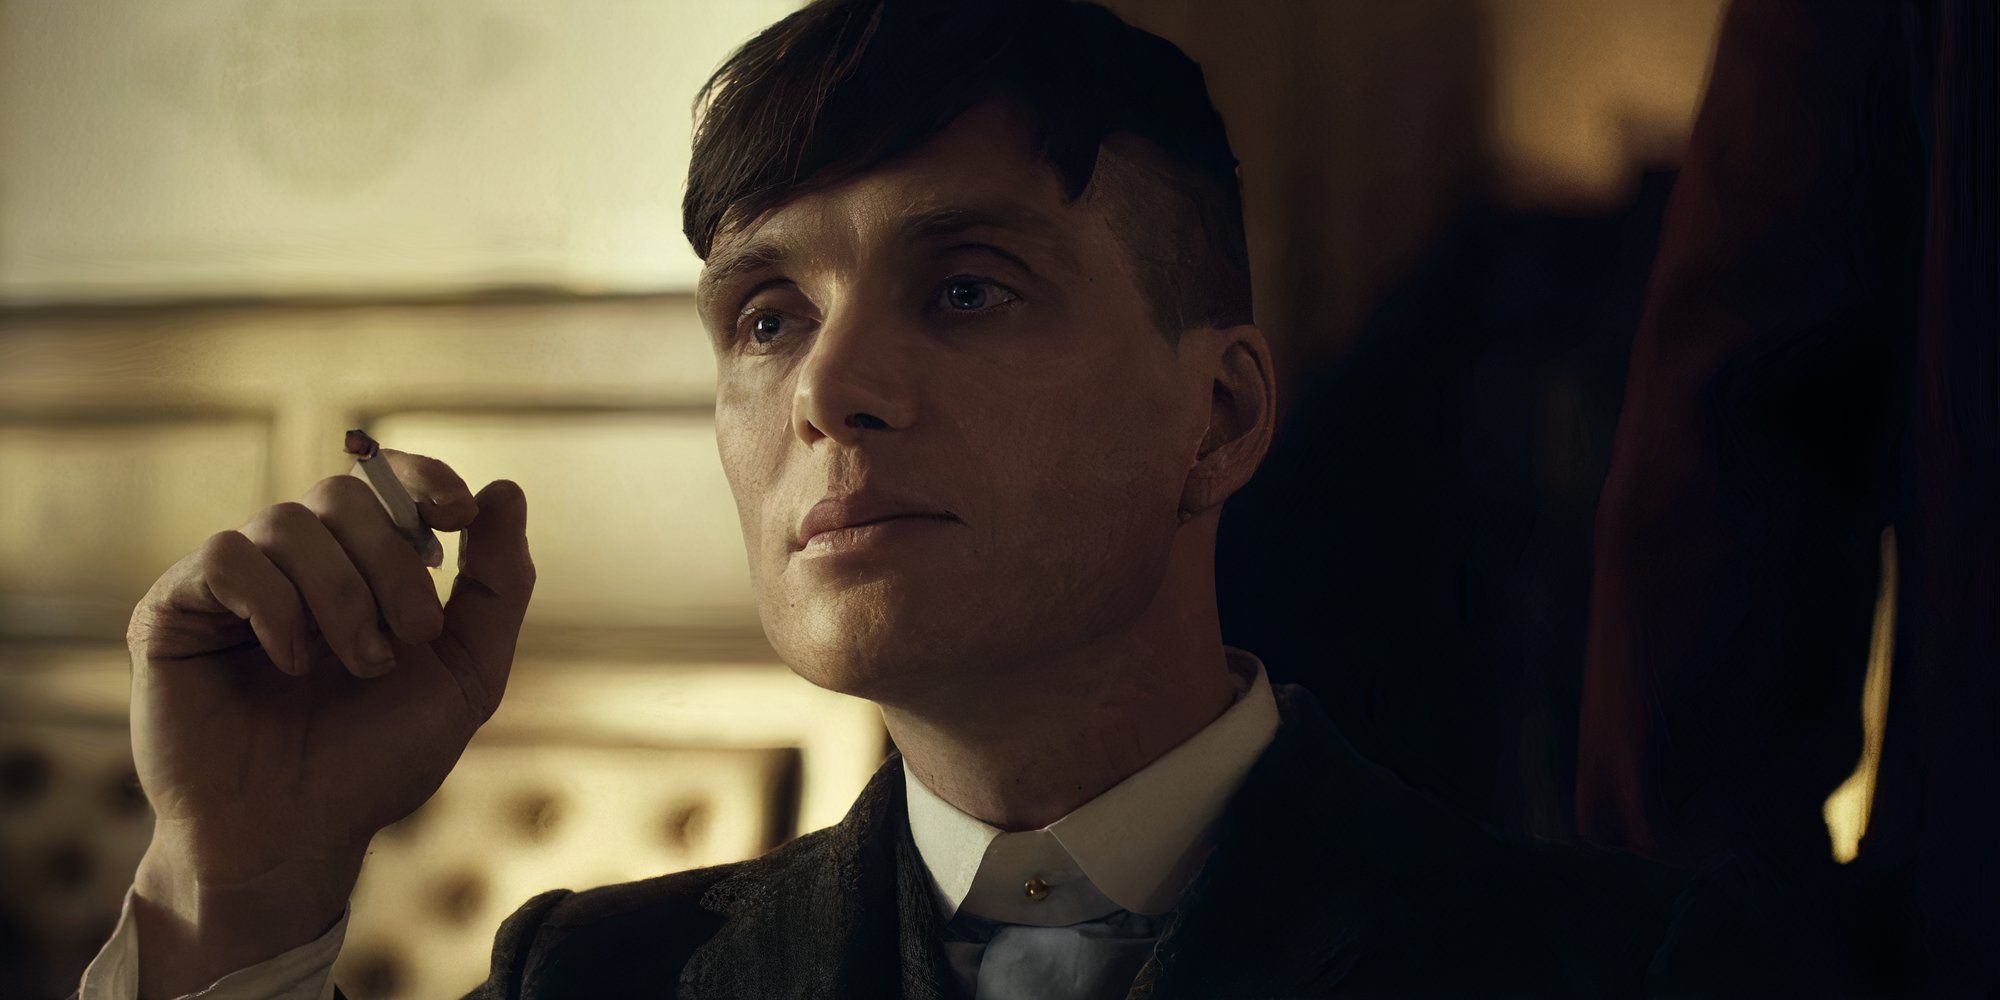 Cillian Murphy as Tommy Shelby holding a cigarette in Peaky Blinders.